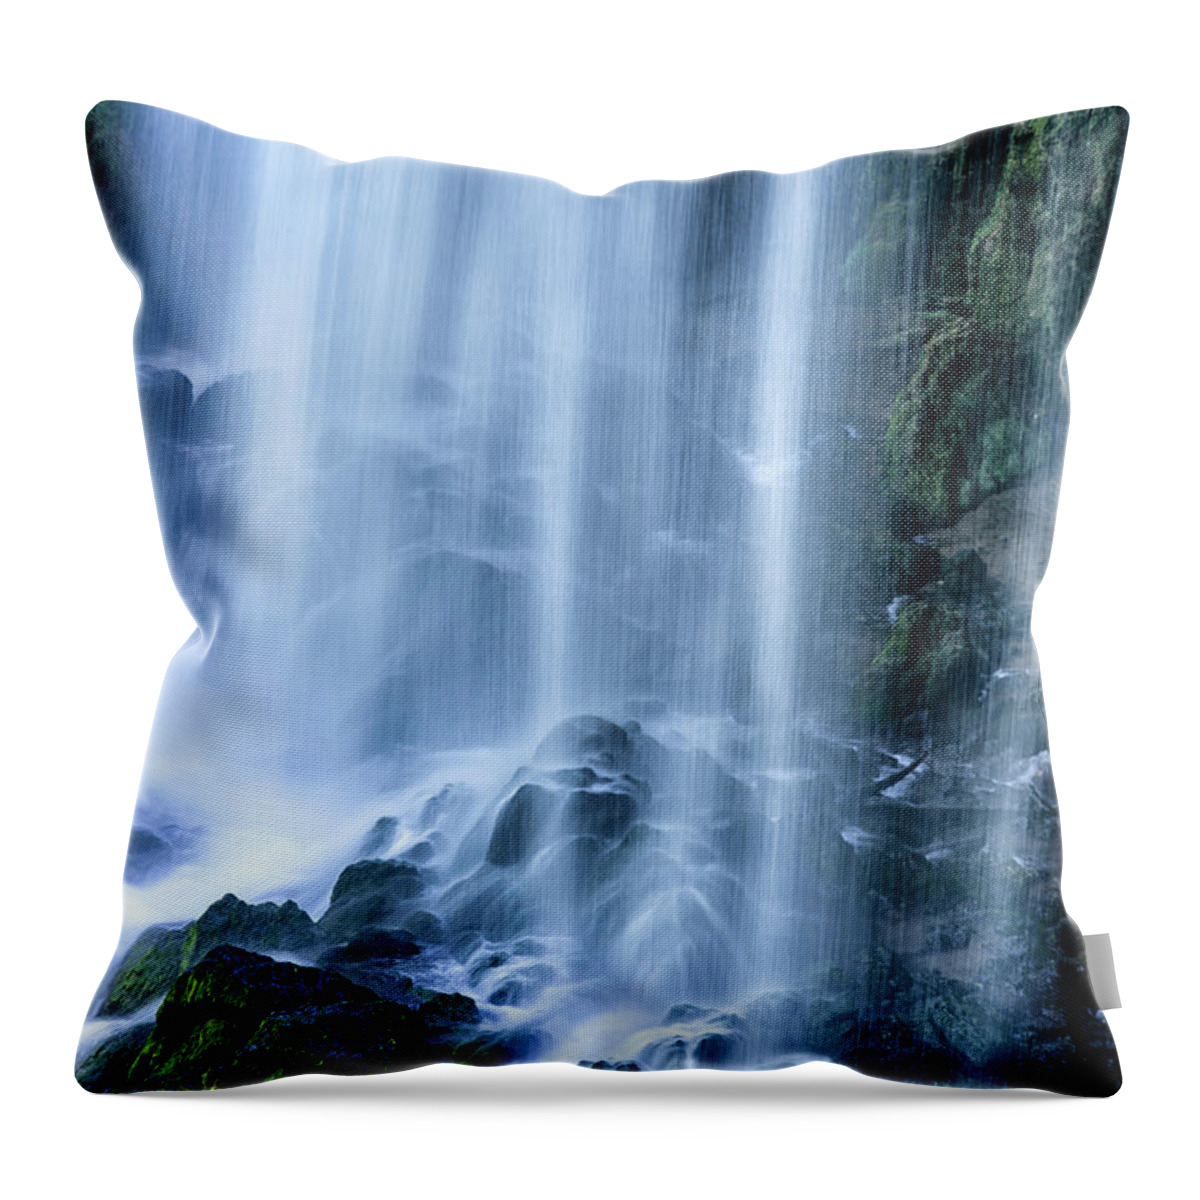 Falling Spring Falls Throw Pillow featuring the photograph Falling Spring Falls #1 by Thomas R Fletcher